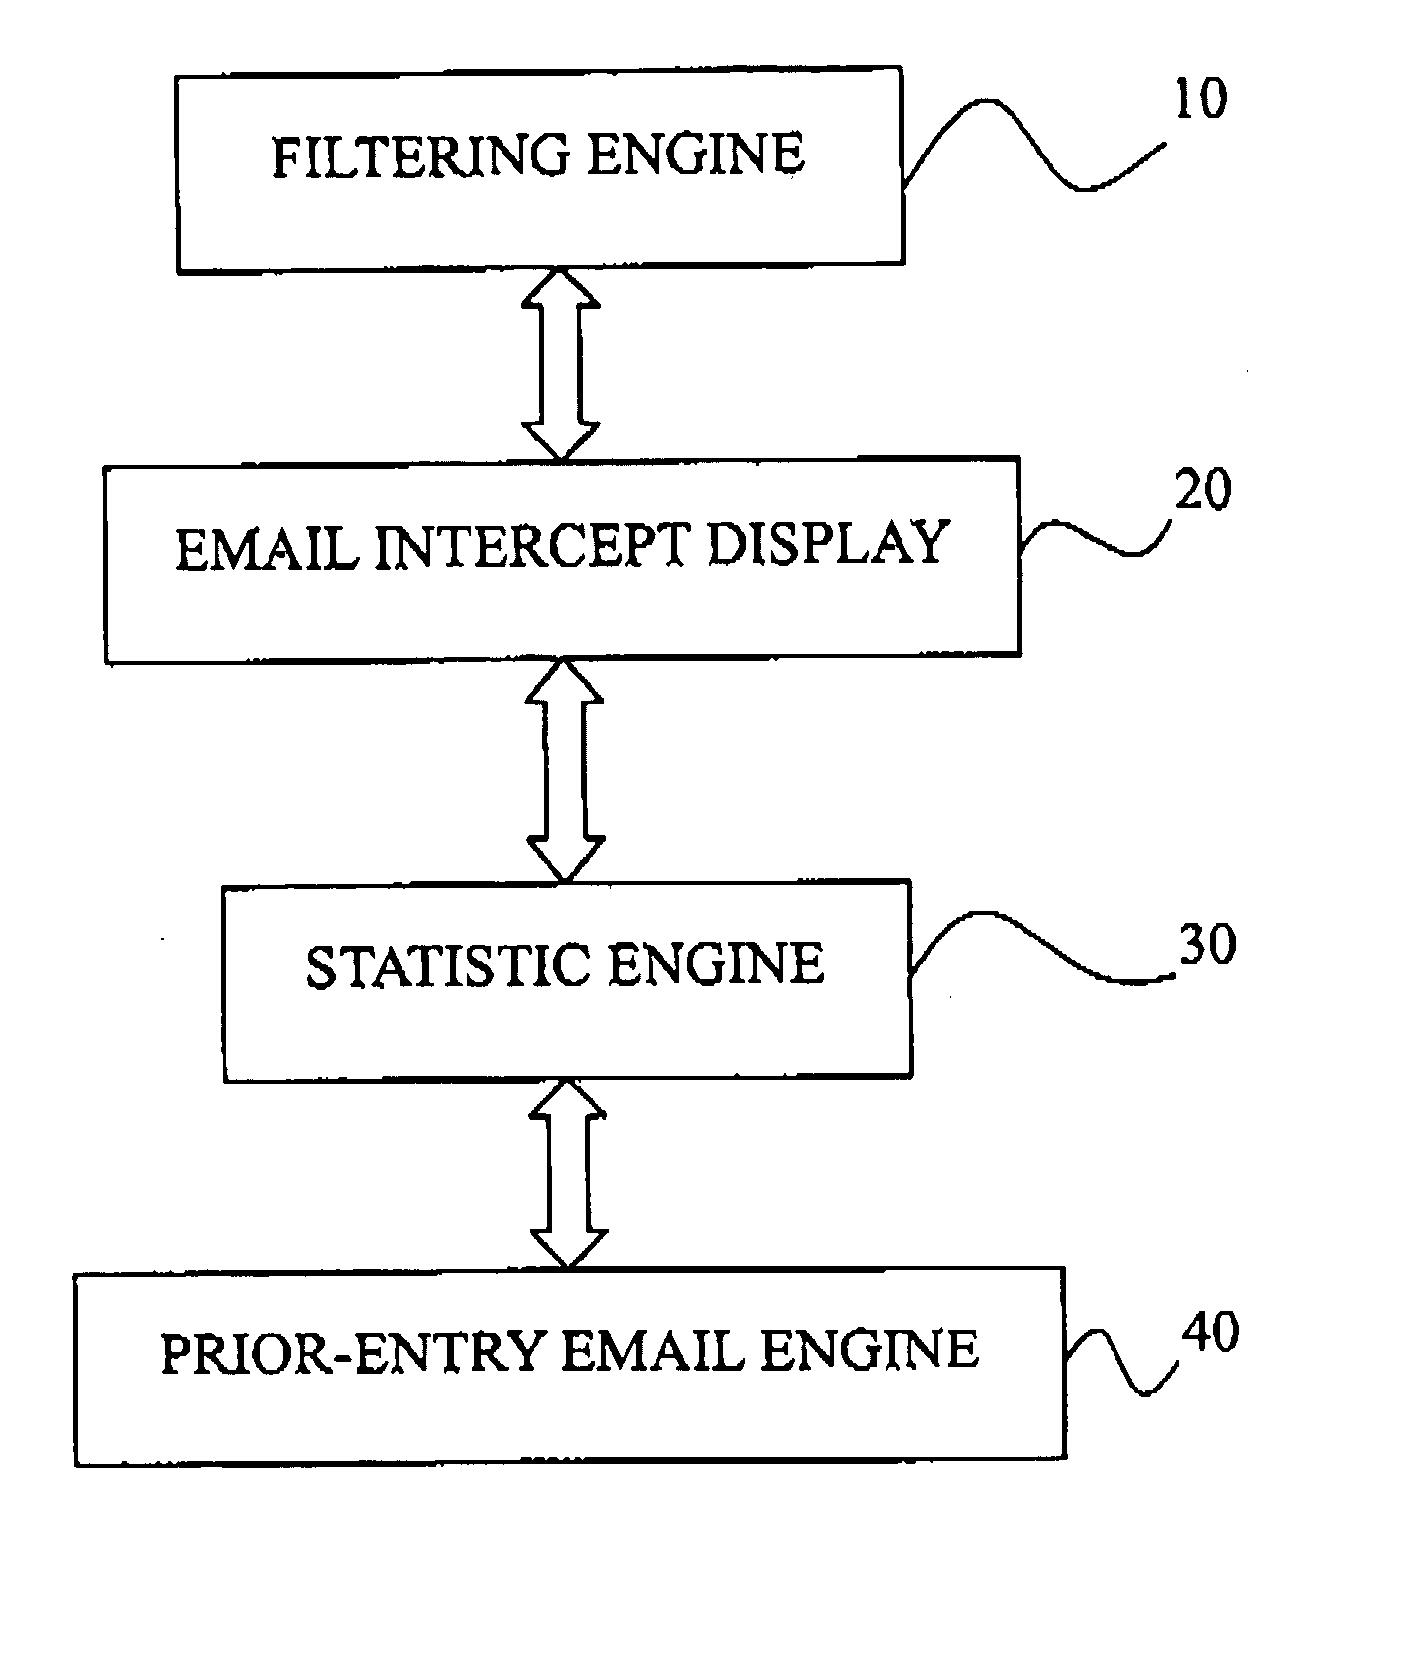 Filtering device for eliminating unsolicited email